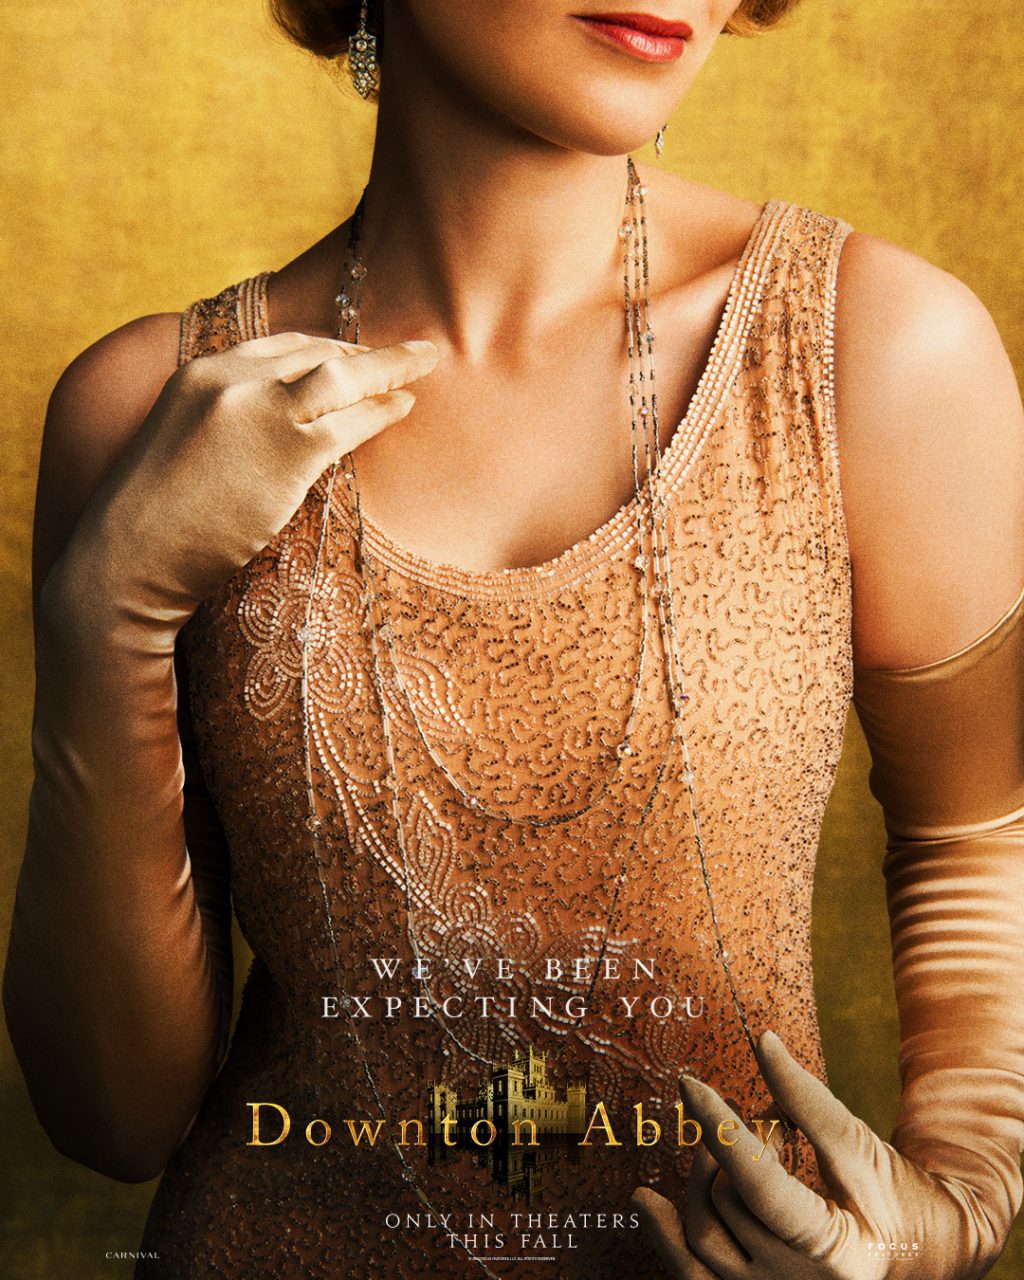 Downton Abbey poster (Focus Features)